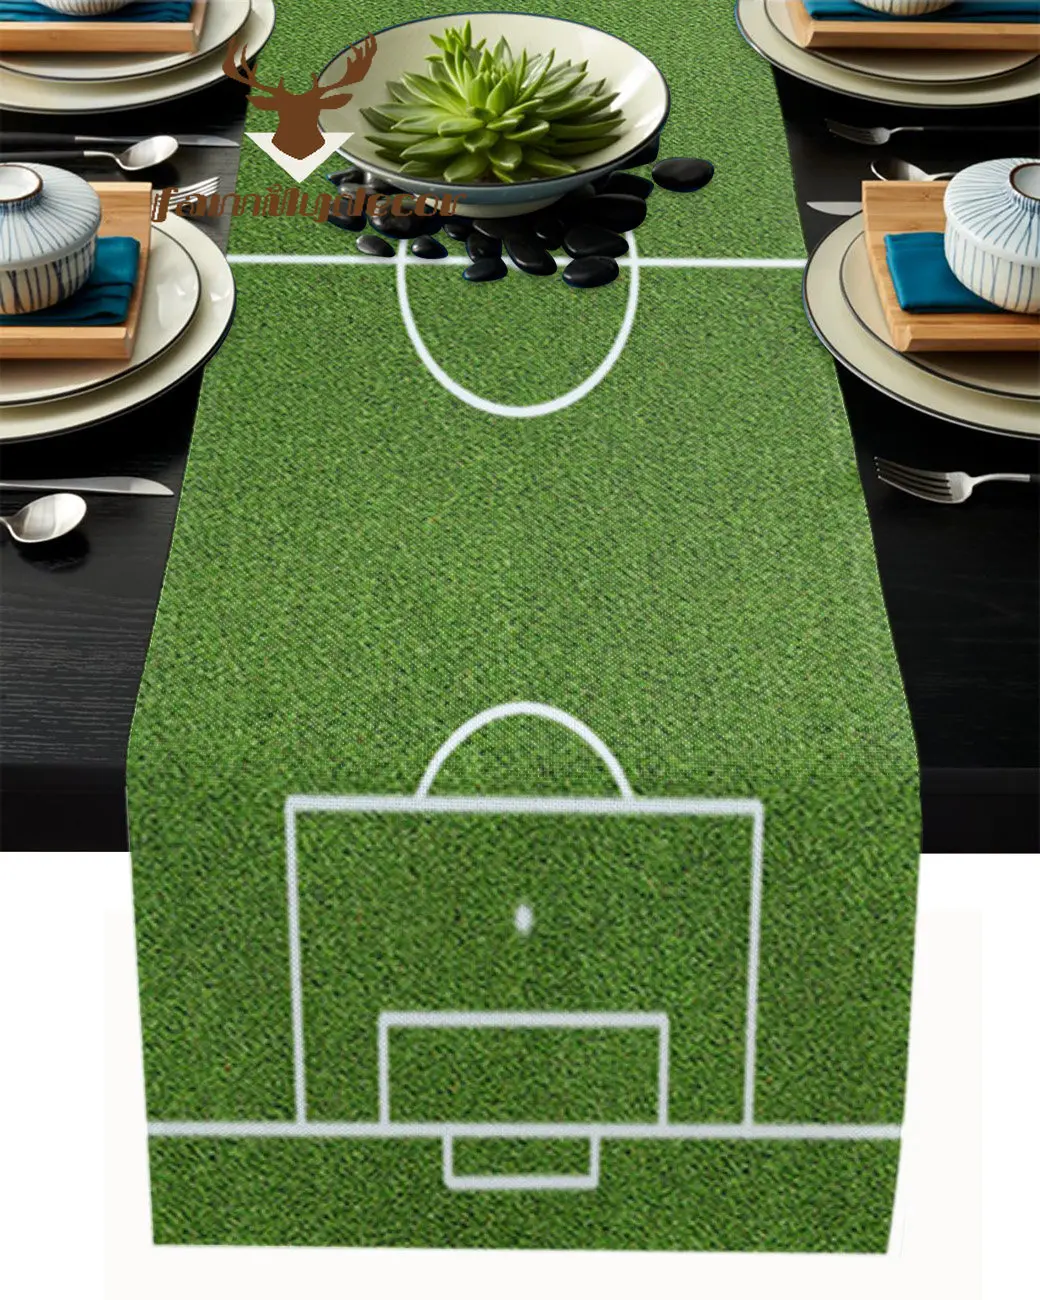 35*120cm Artificial Grass Dining Table Runner, Green Grass Table Decoration  for Wedding Banquet Holiday Party Indoor/Outdoor